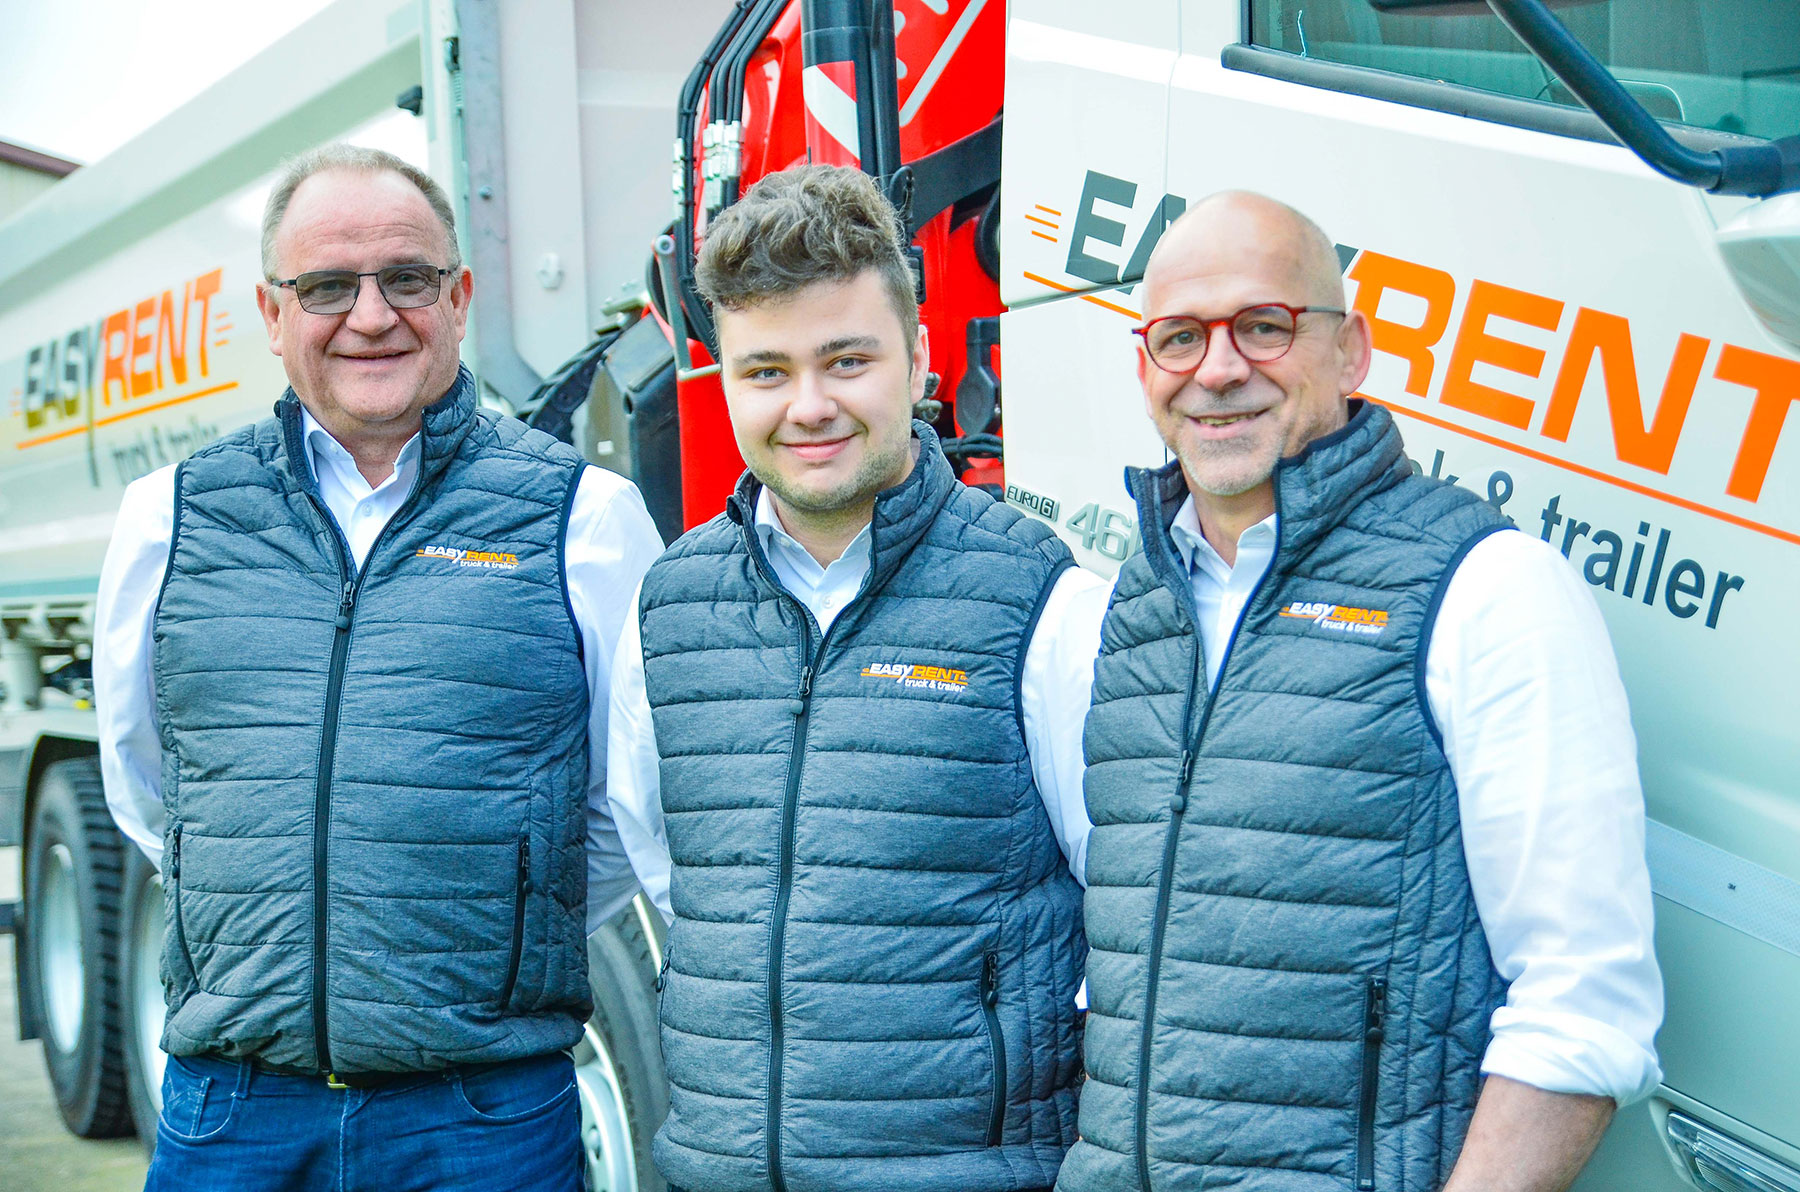 The sales team of Easy Rent truck & trailer Belgium and Luxembourg. Marc Halmes, Patrick Hoffmann and Olivier Marquet. Group photo in front of an Easy Rent crane vehicle